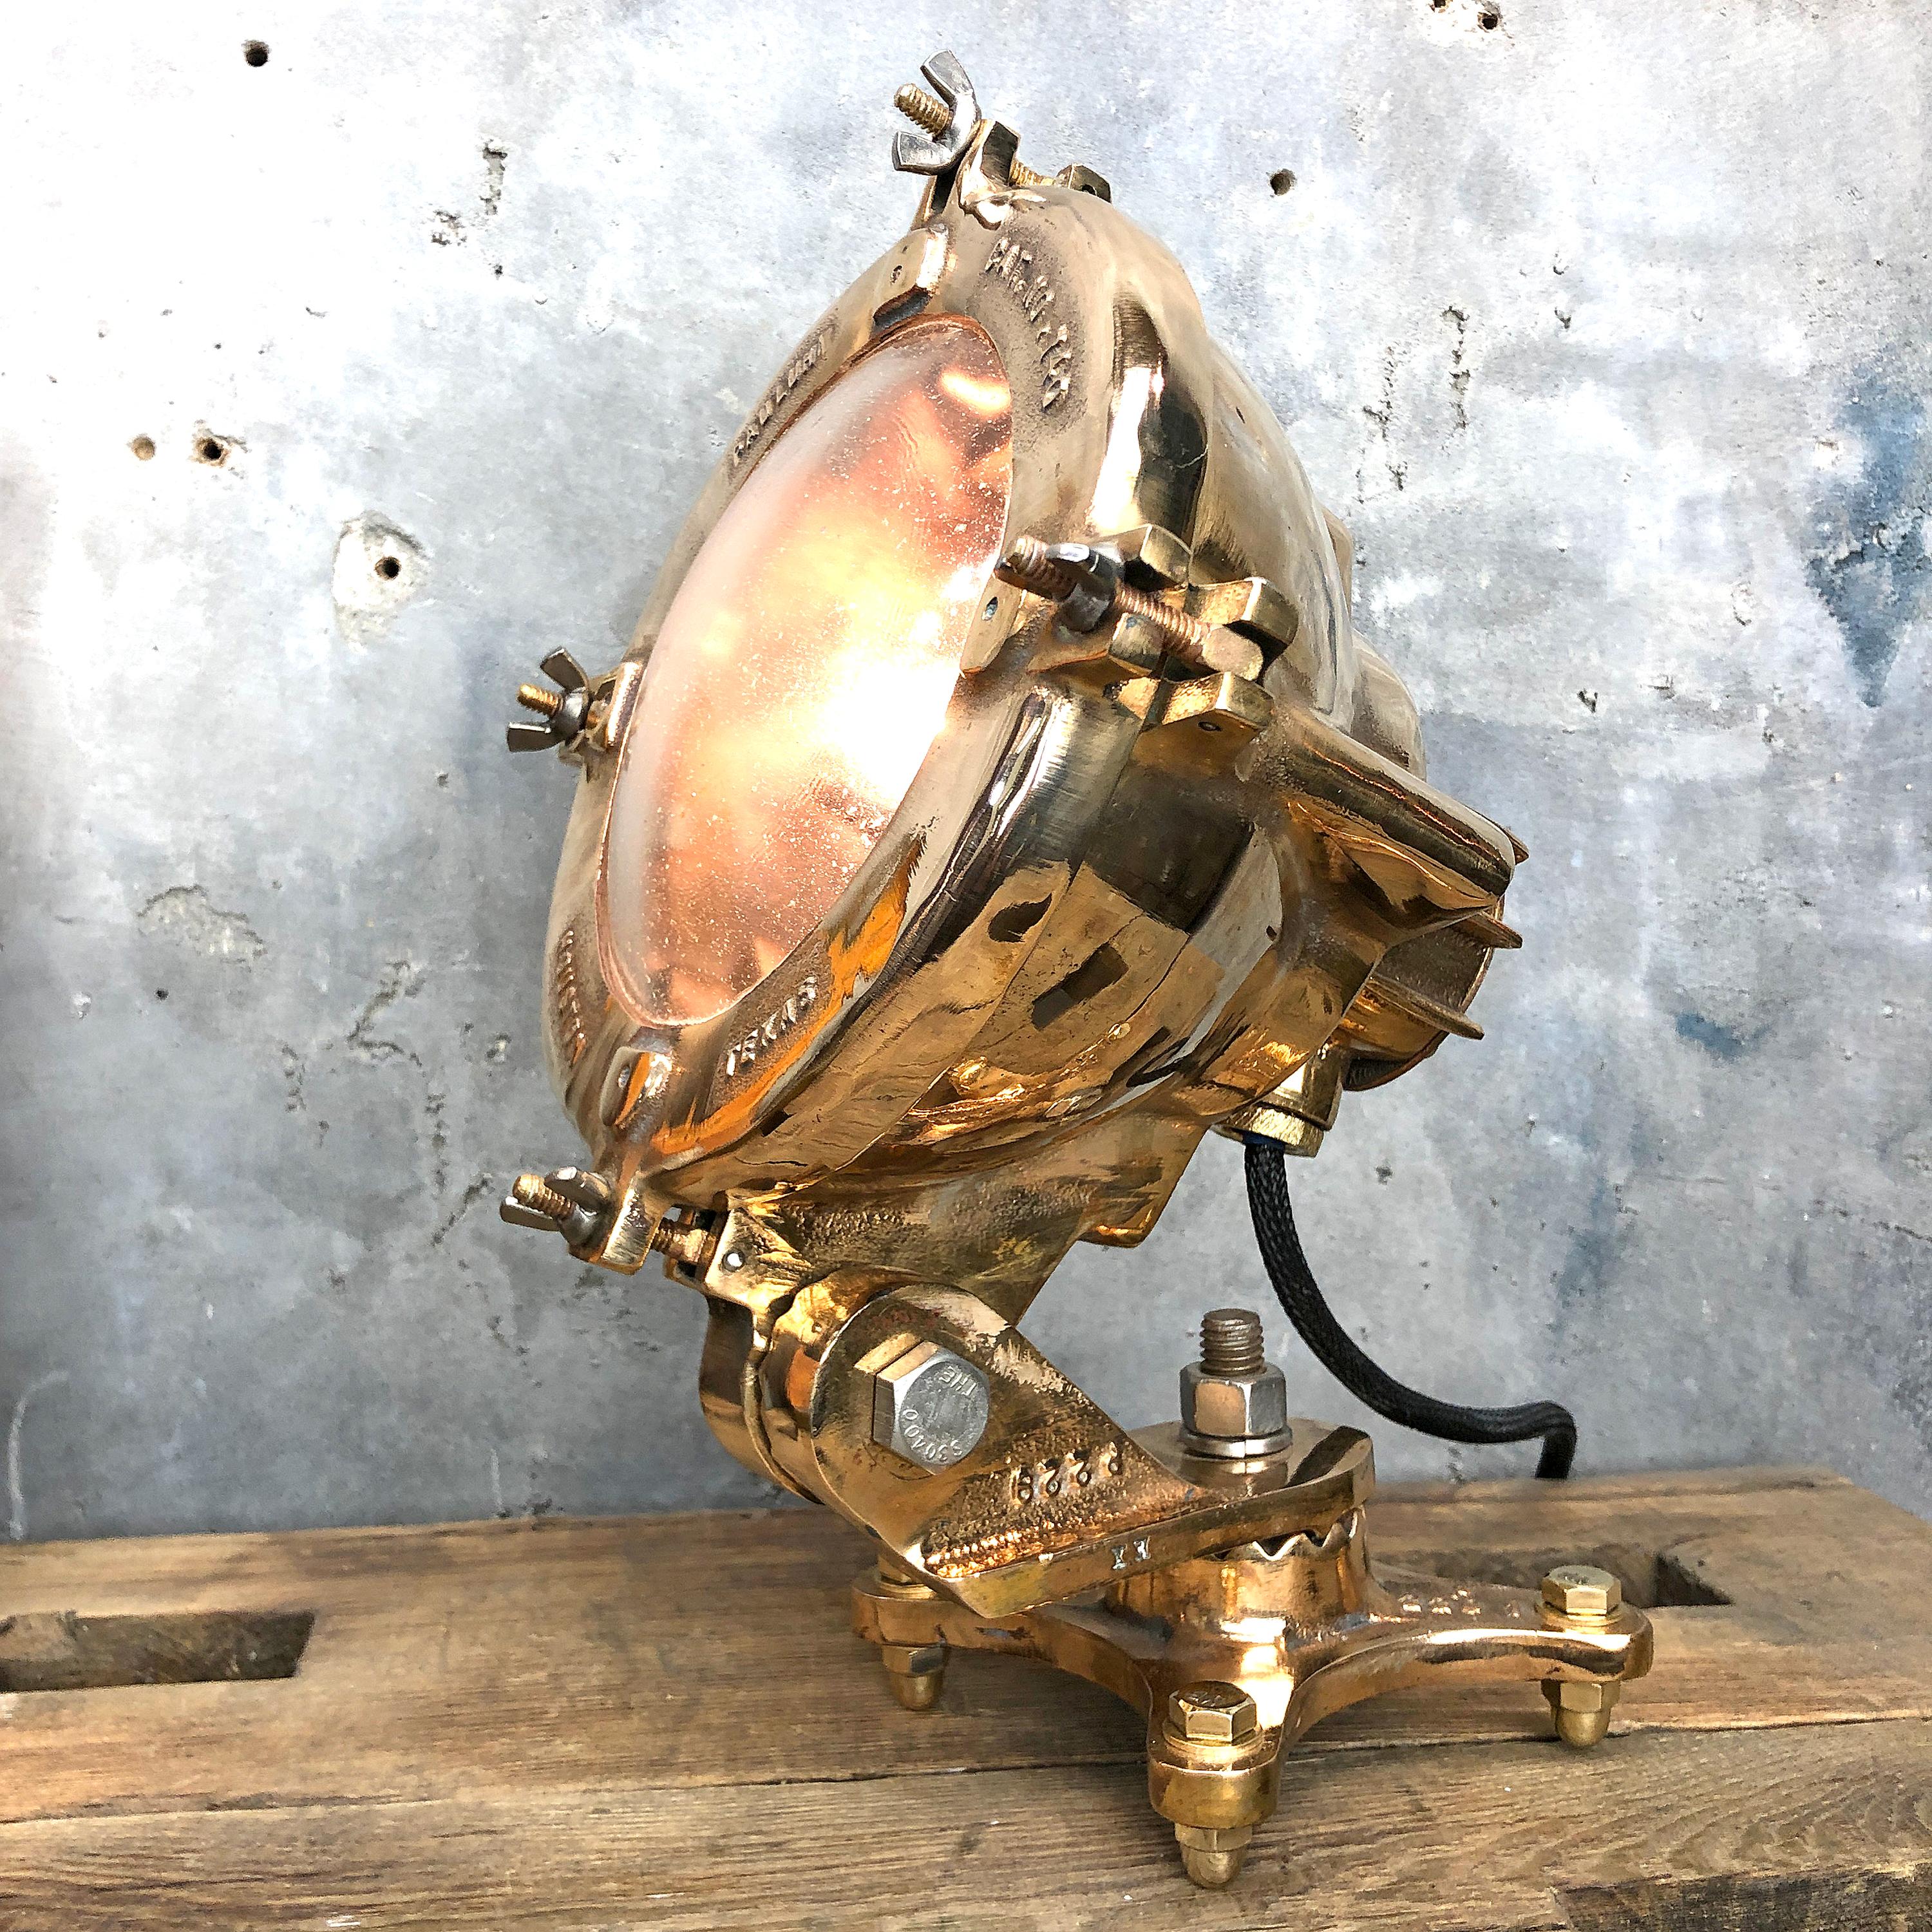 A vintage industrial 1950s American cast bronze table lamp made in Houston Texas by Pauluhn a subsidiary of Crouse Hinds.

It has been manufactured using cast phosphor bronze with a tempered convex glass protective cover. 

The fixture shows